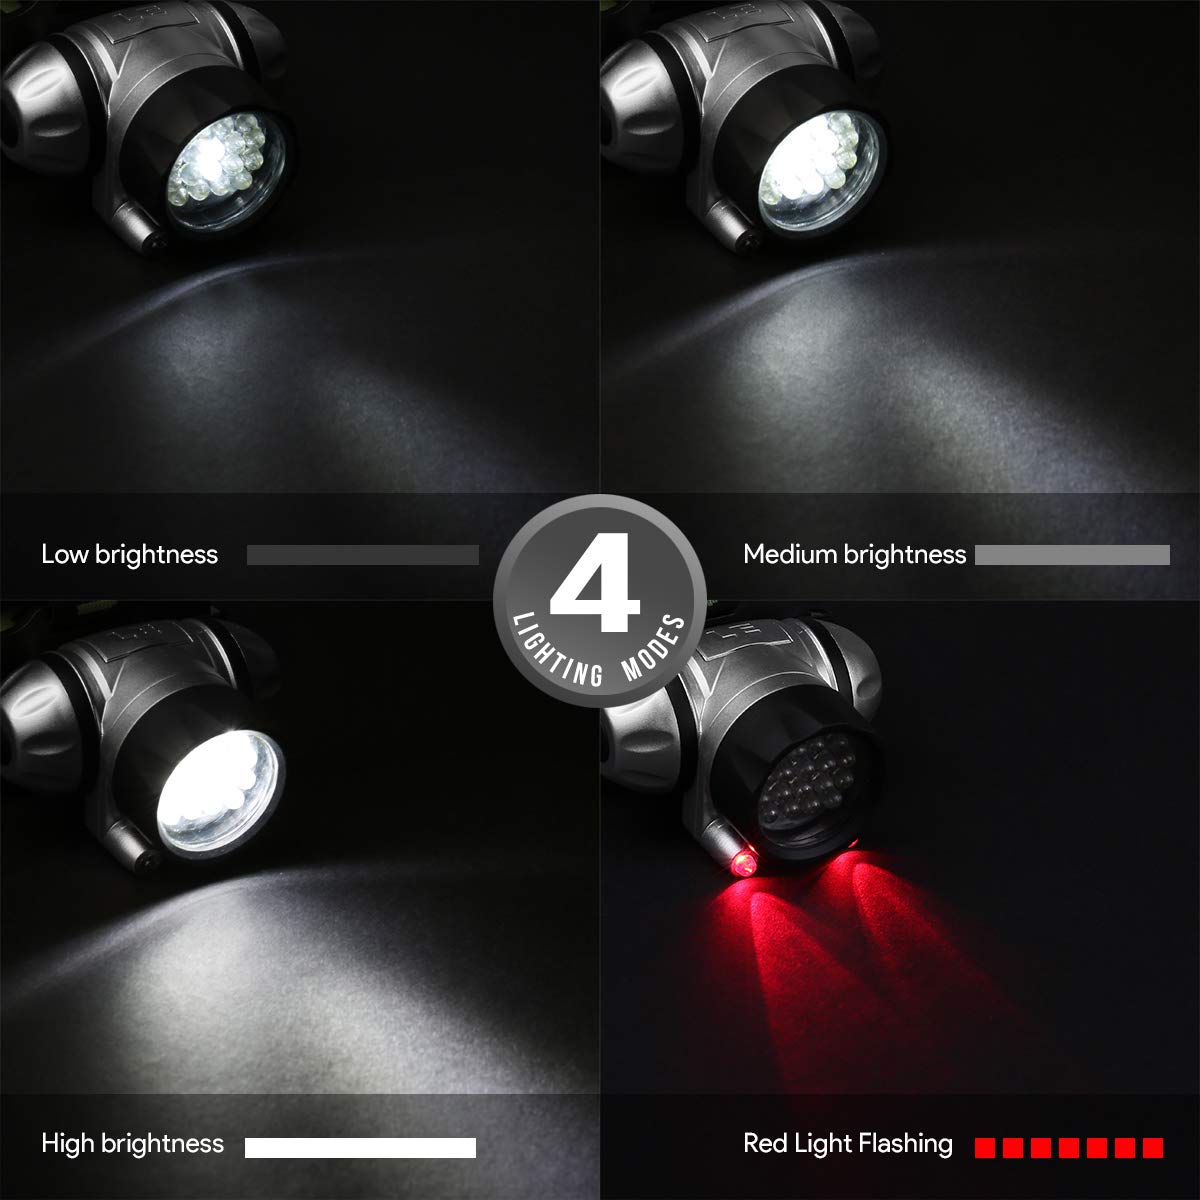 LE LED Headlamp Flashlight, Headlight with Red Light, Water Resistance, Adjustable for Kids and Adults, Perfect Head Light for Running, Hiking, Reading, Camping, Outdoor and More, Batteries Included